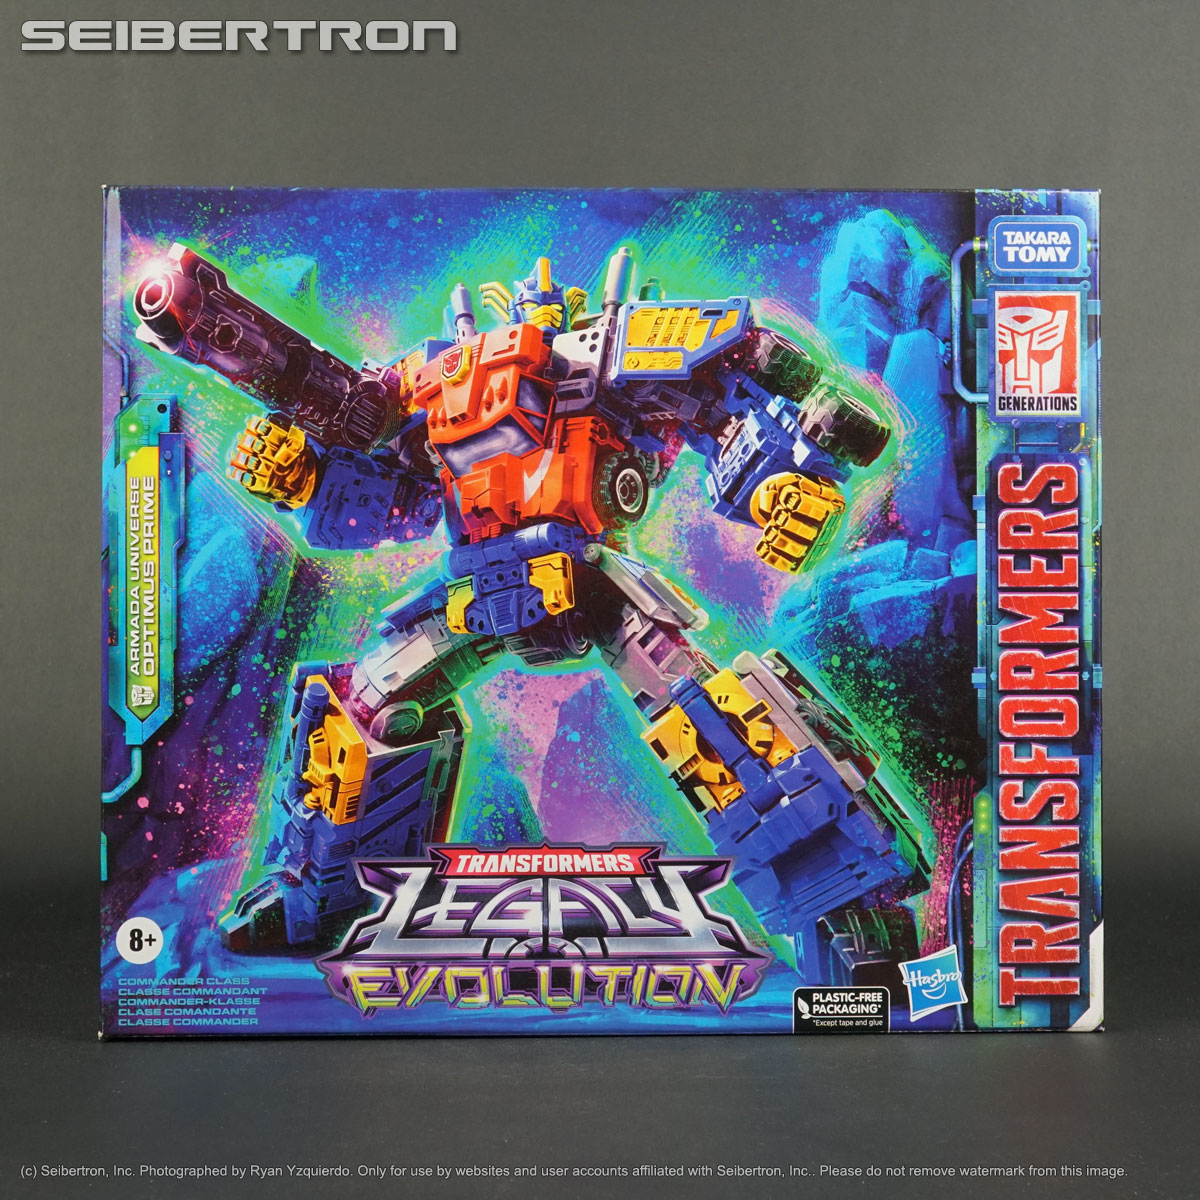 New Transformers Toys At The Seibertron